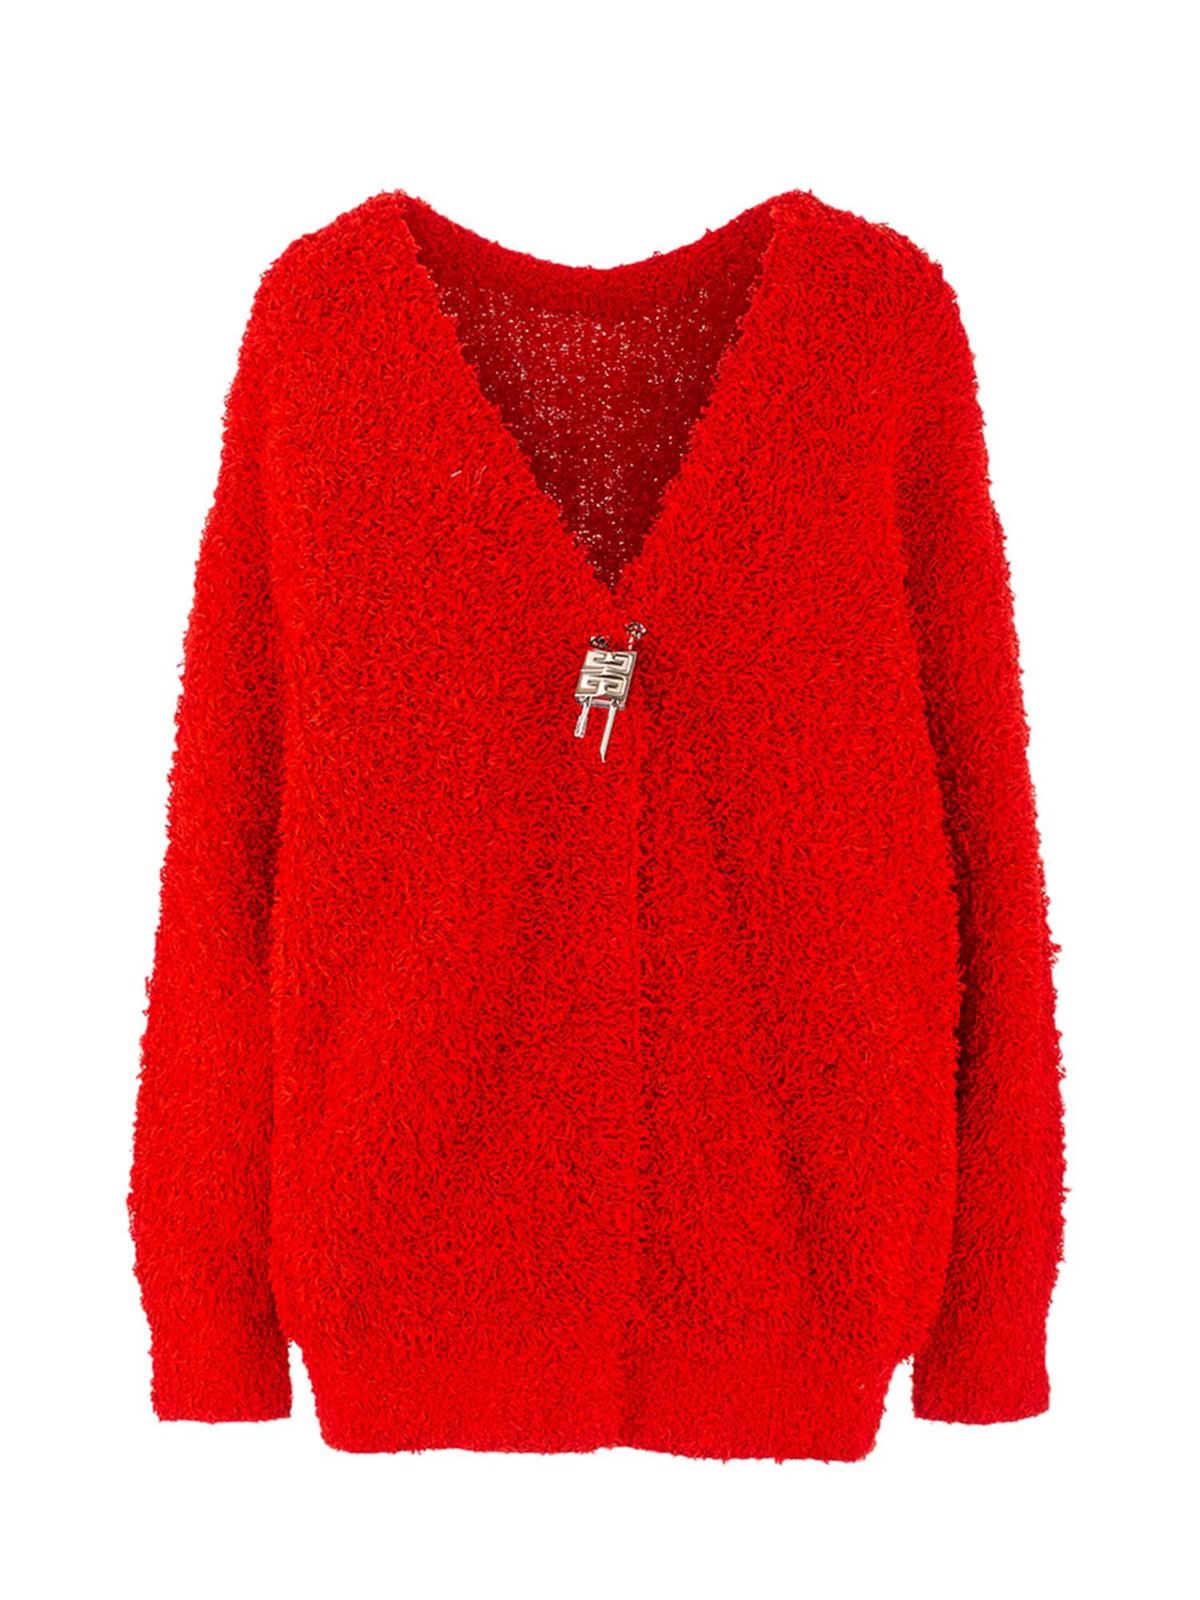 GIVENCHY PADLOCK CARDIGAN IN RED